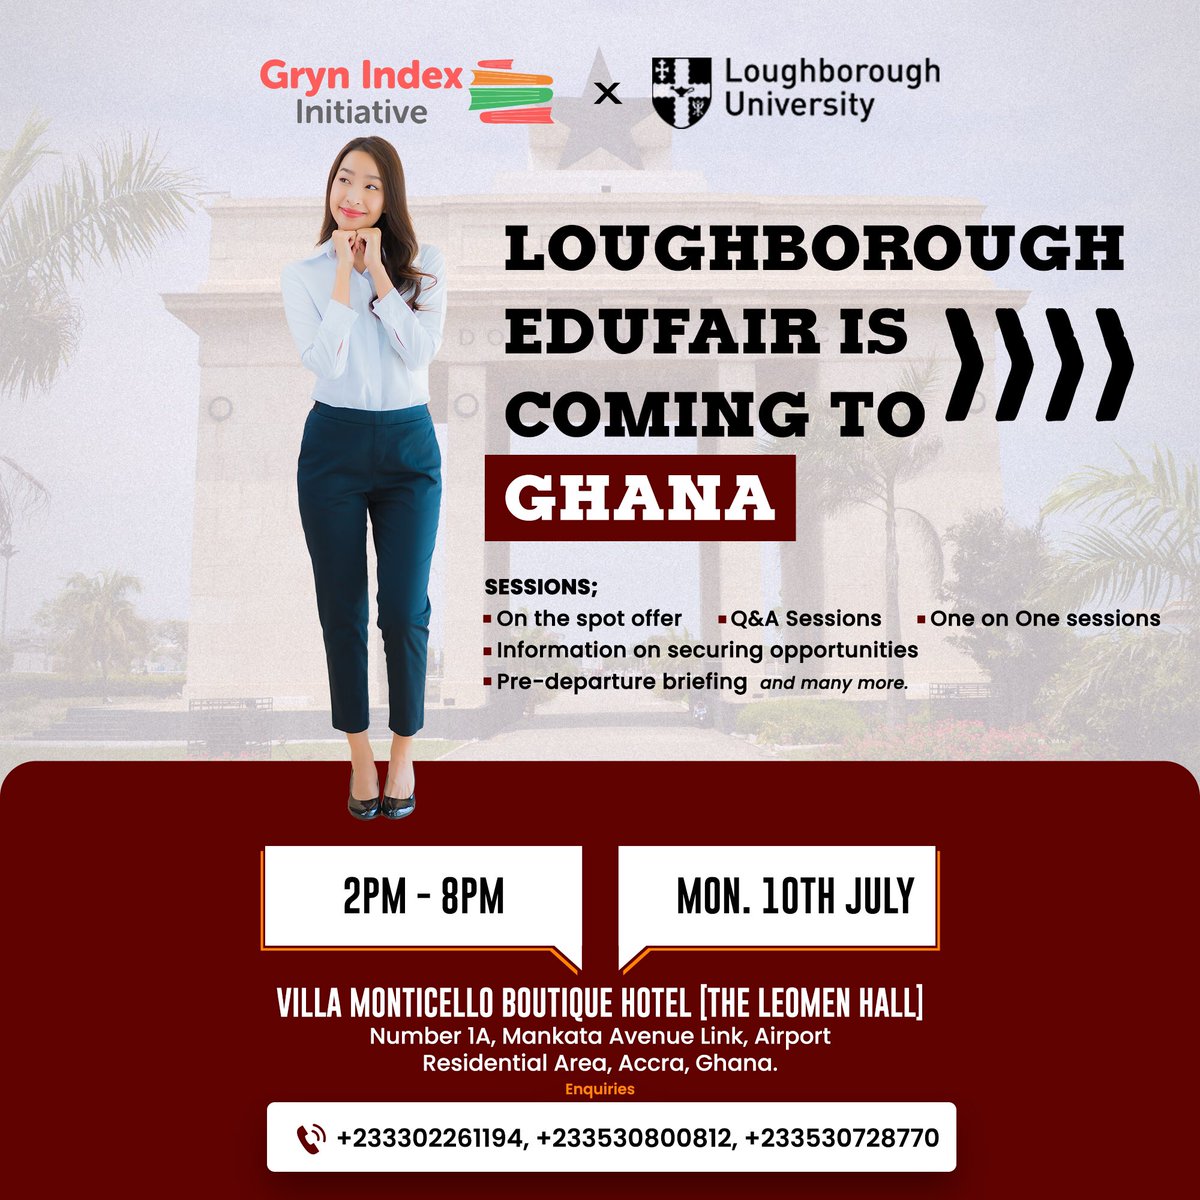 If you are in Accra and want to study in the UK I get news for you 

The Loughborough EduFair will be live in Accra  on the 10th of July by 2PM at the Villa Monticello Boutique Hotel (The Leomen Hall) Number 1A Mankata Avenue Link, Airport Residential Area.